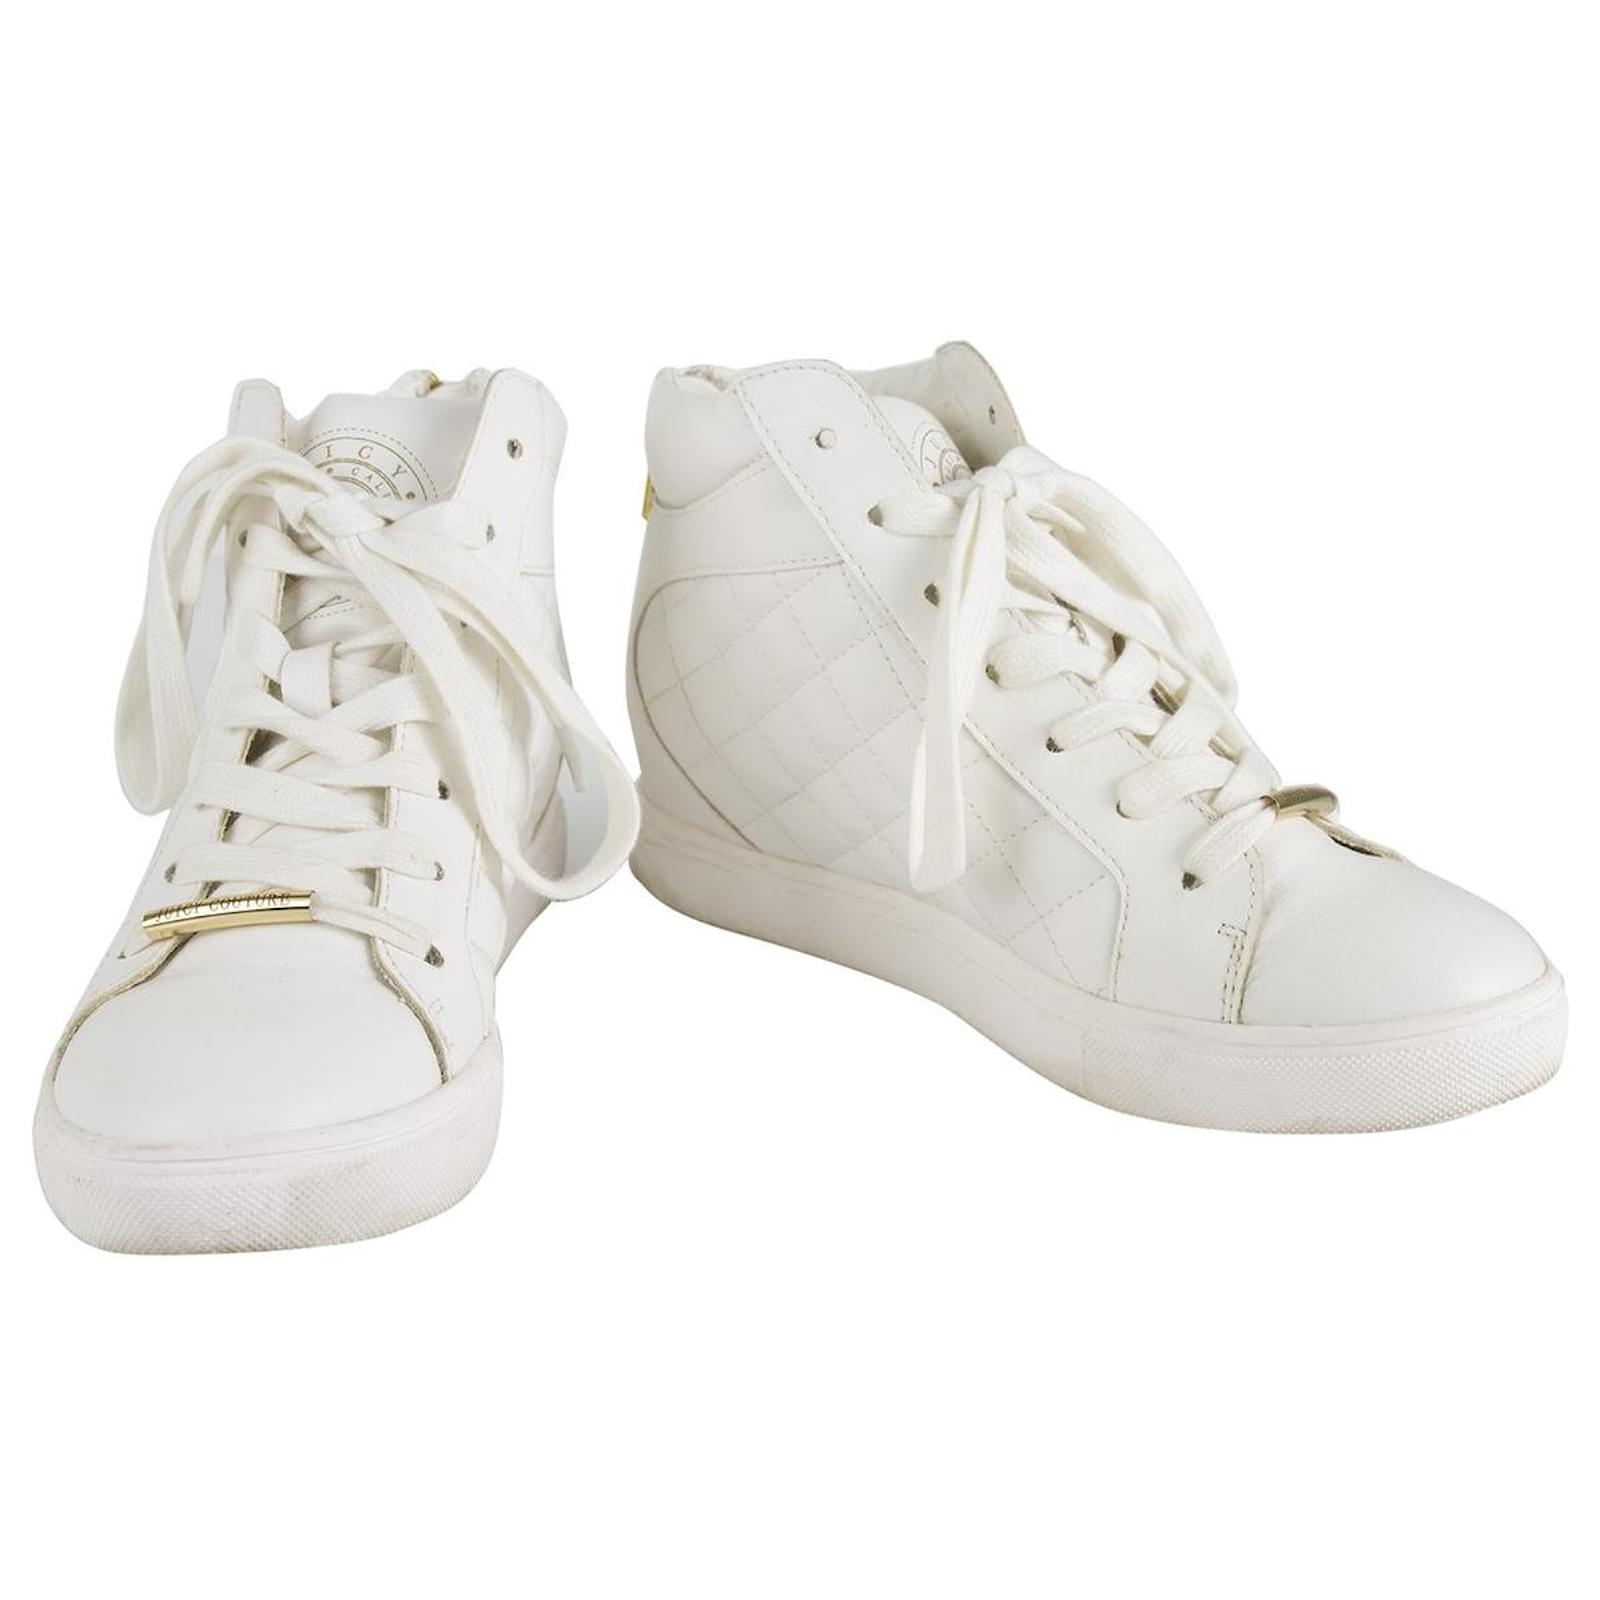 Juicy Couture Women's Shoes $24 | Free Stuff Finder